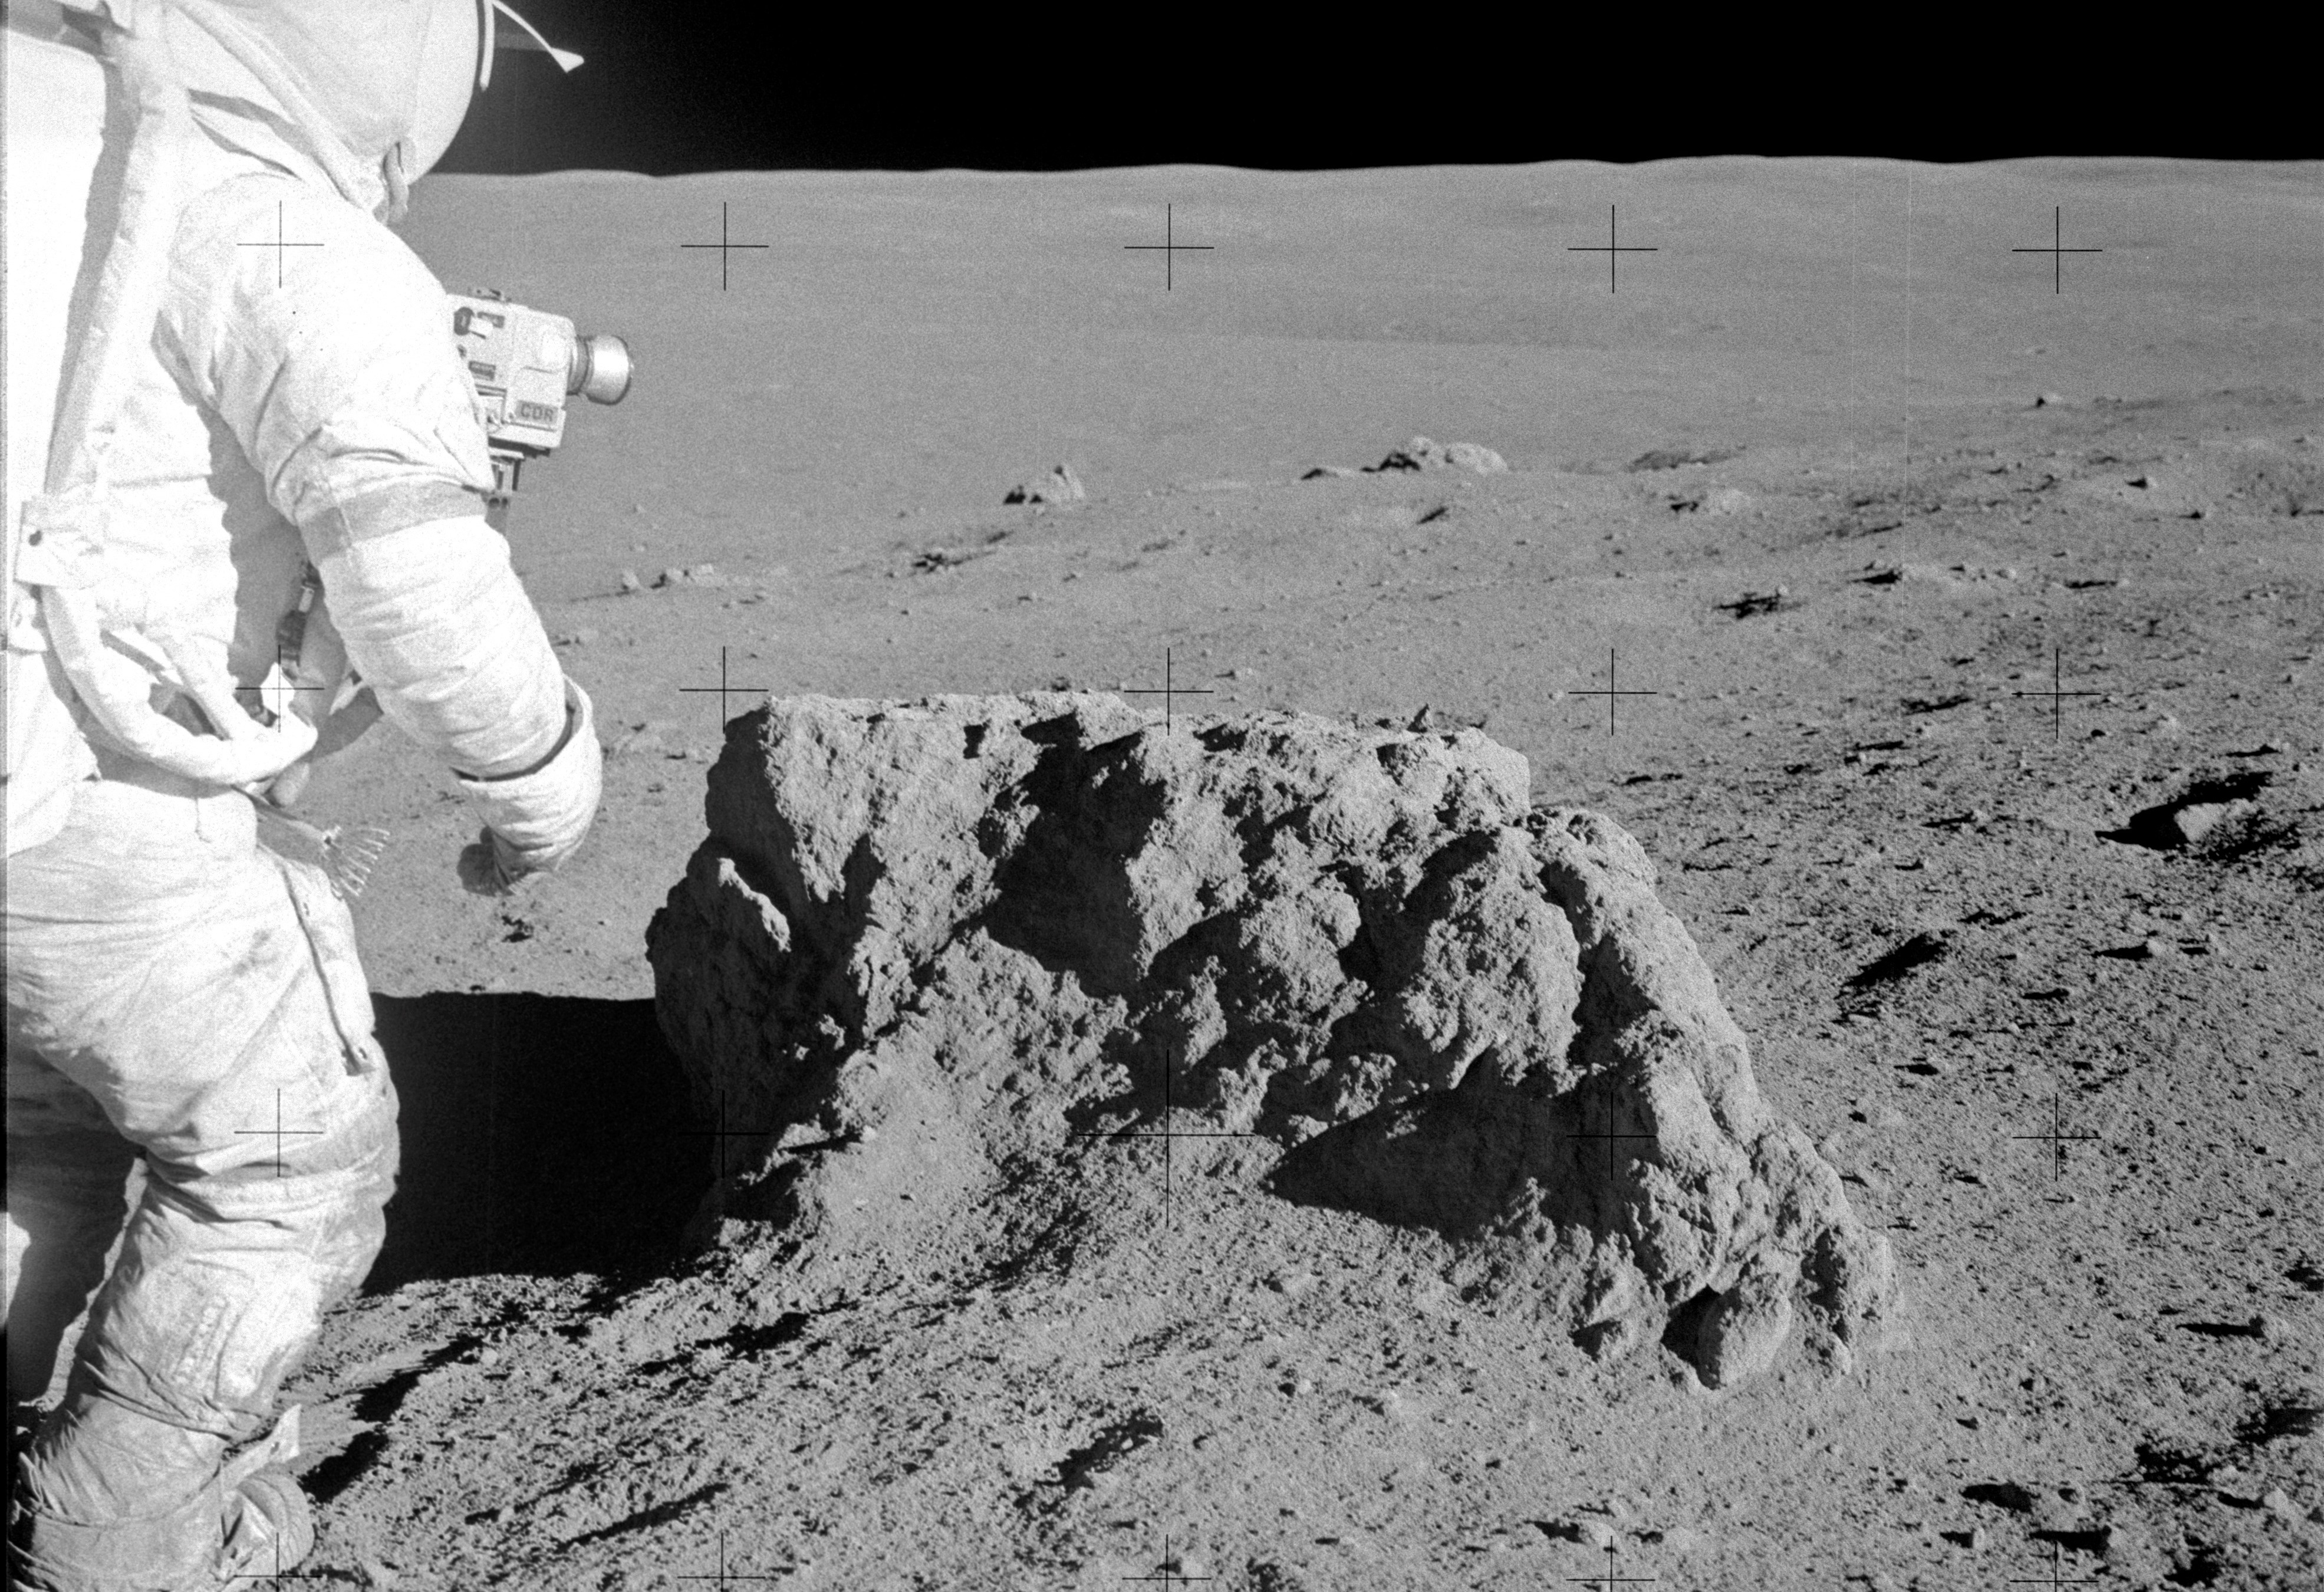 Moon Dust Could Give Astronauts Permanent DNA Damage, Study Finds